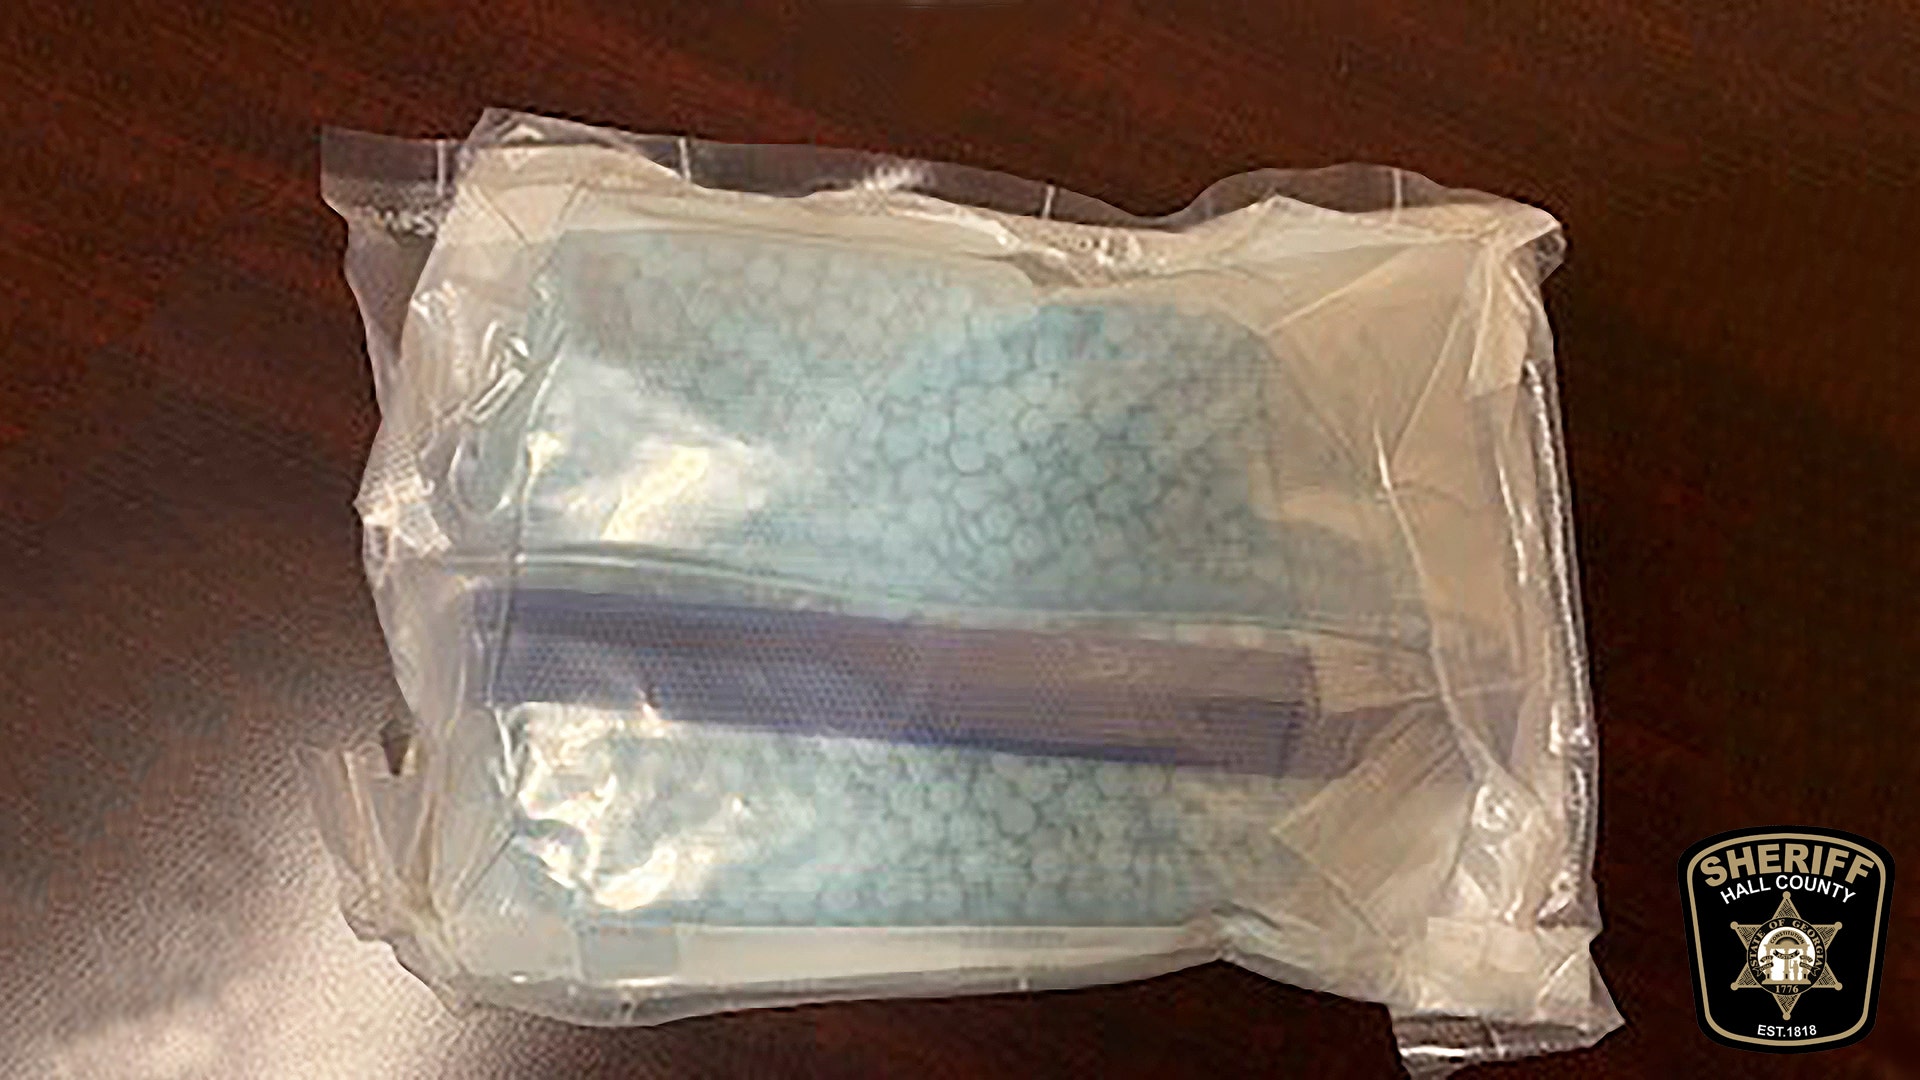 Georgia K9 police discover $172,000 worth of fentanyl tablets during routine search at package delivery hub